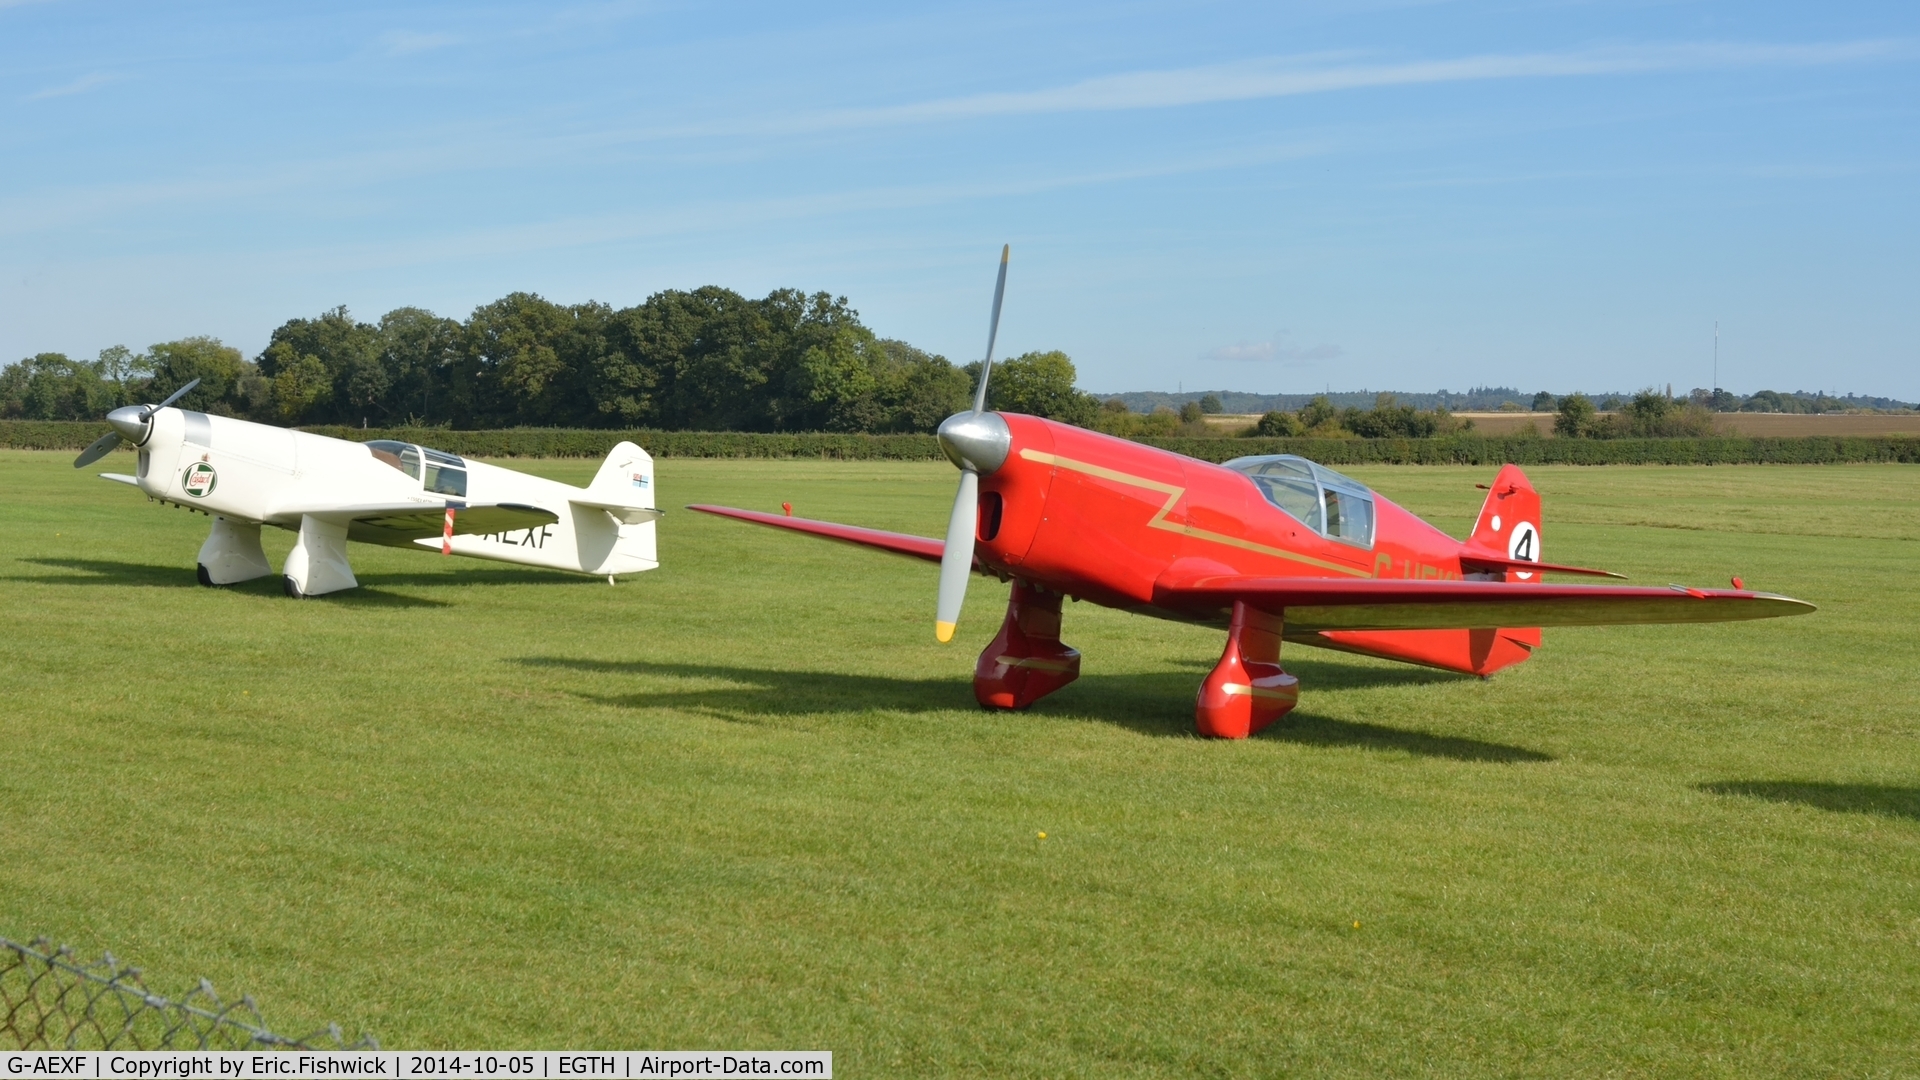 G-AEXF, 1936 Percival E-2H Mew Gull C/N E22, 5. G-AWXF with G-HEKL at the rousing season finale Race Day Air Show at Shuttleworth, Oct. 2014.